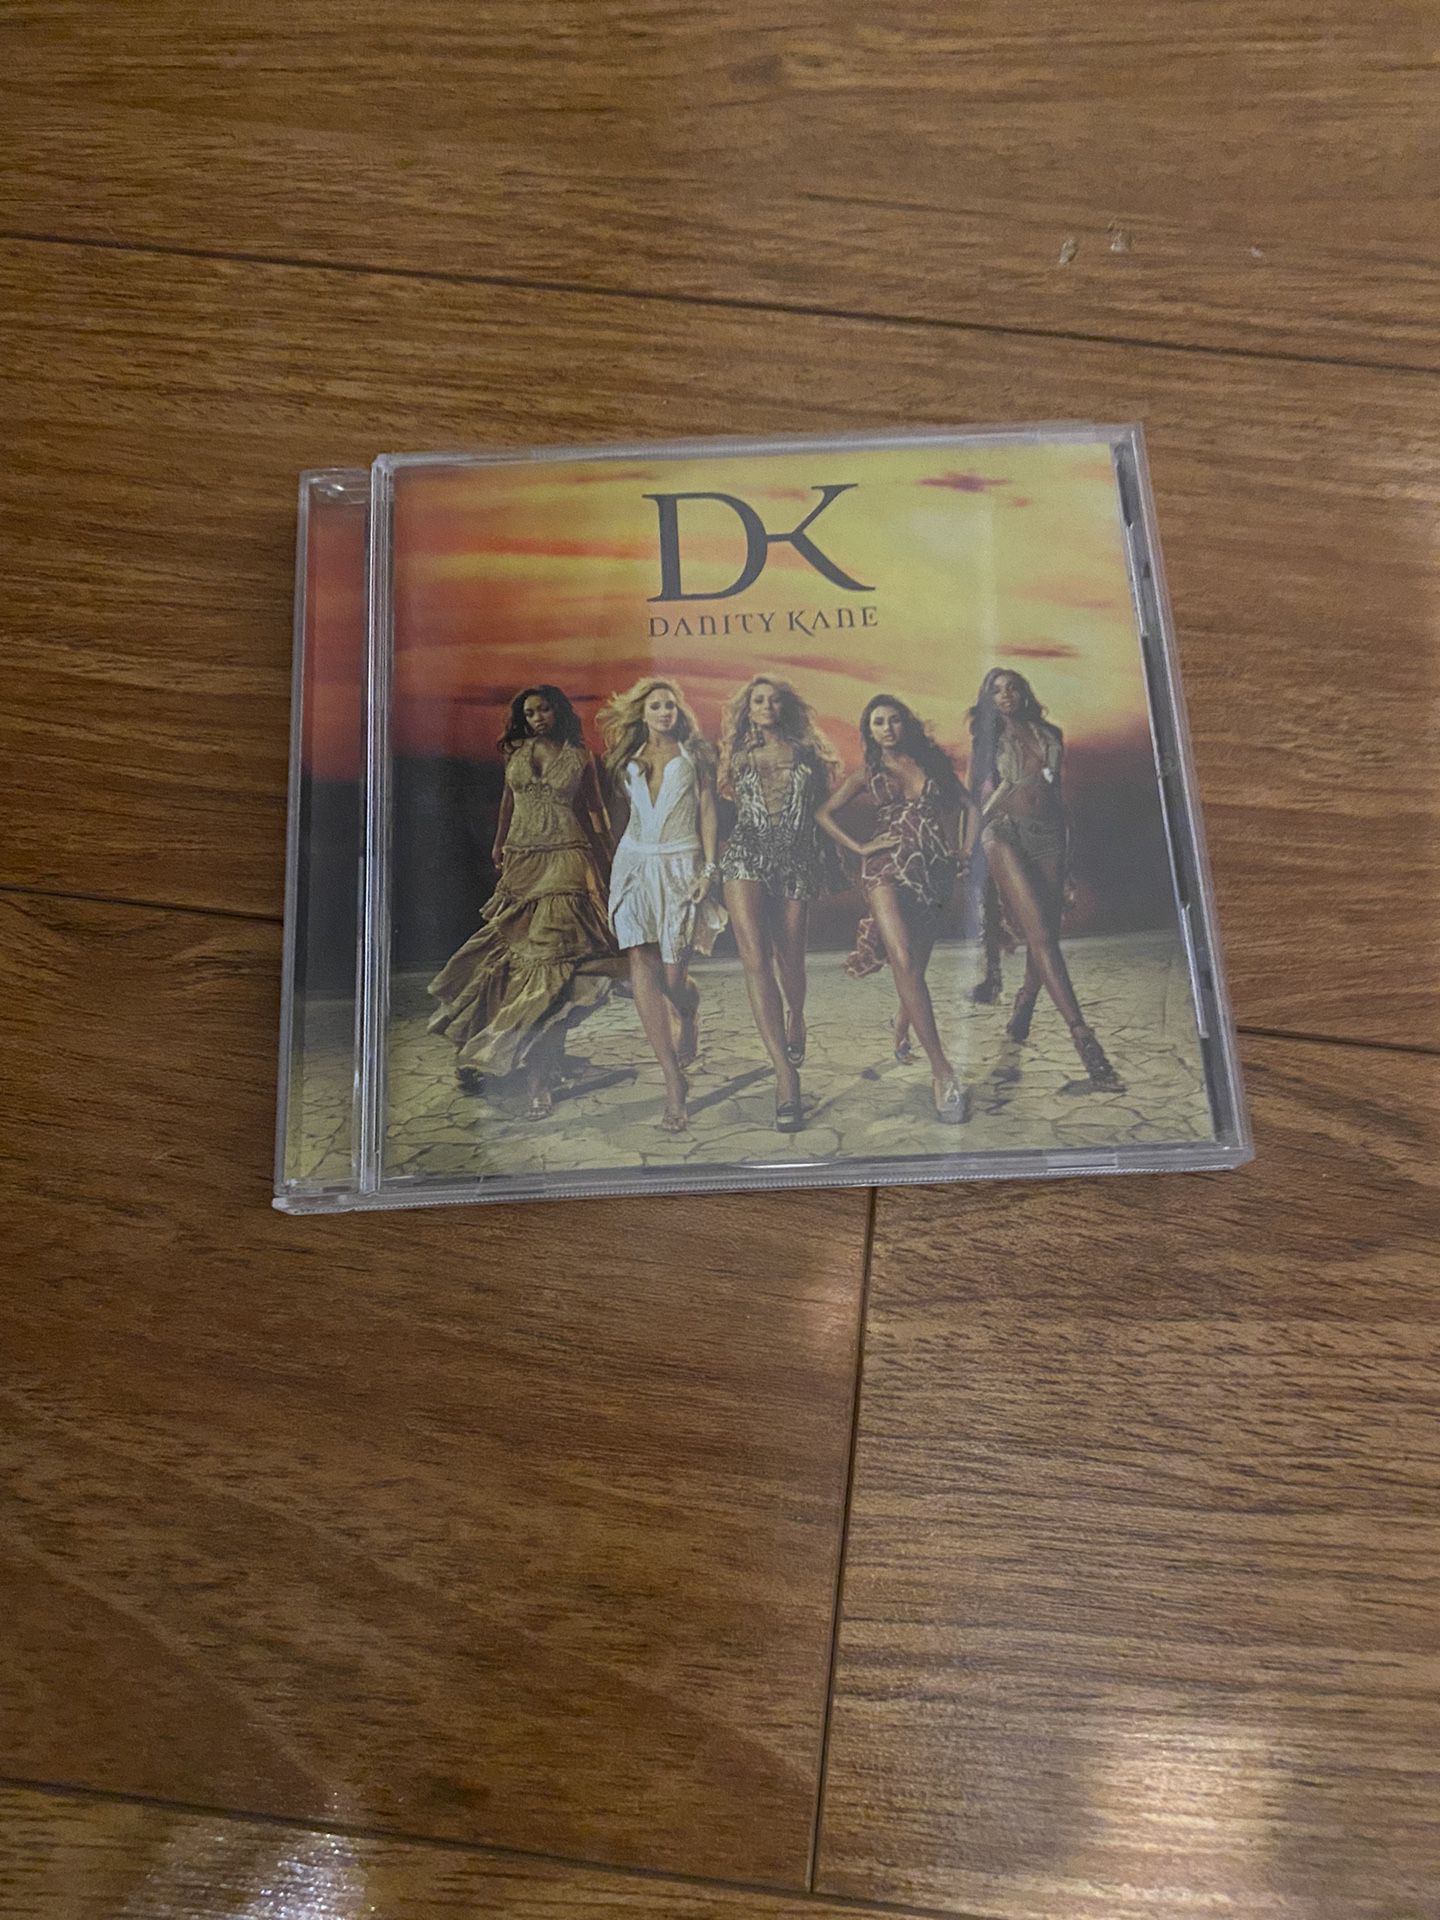 Danity Kane DK Music CD with Booklet Rare Collectible Bad Boy Records 2006